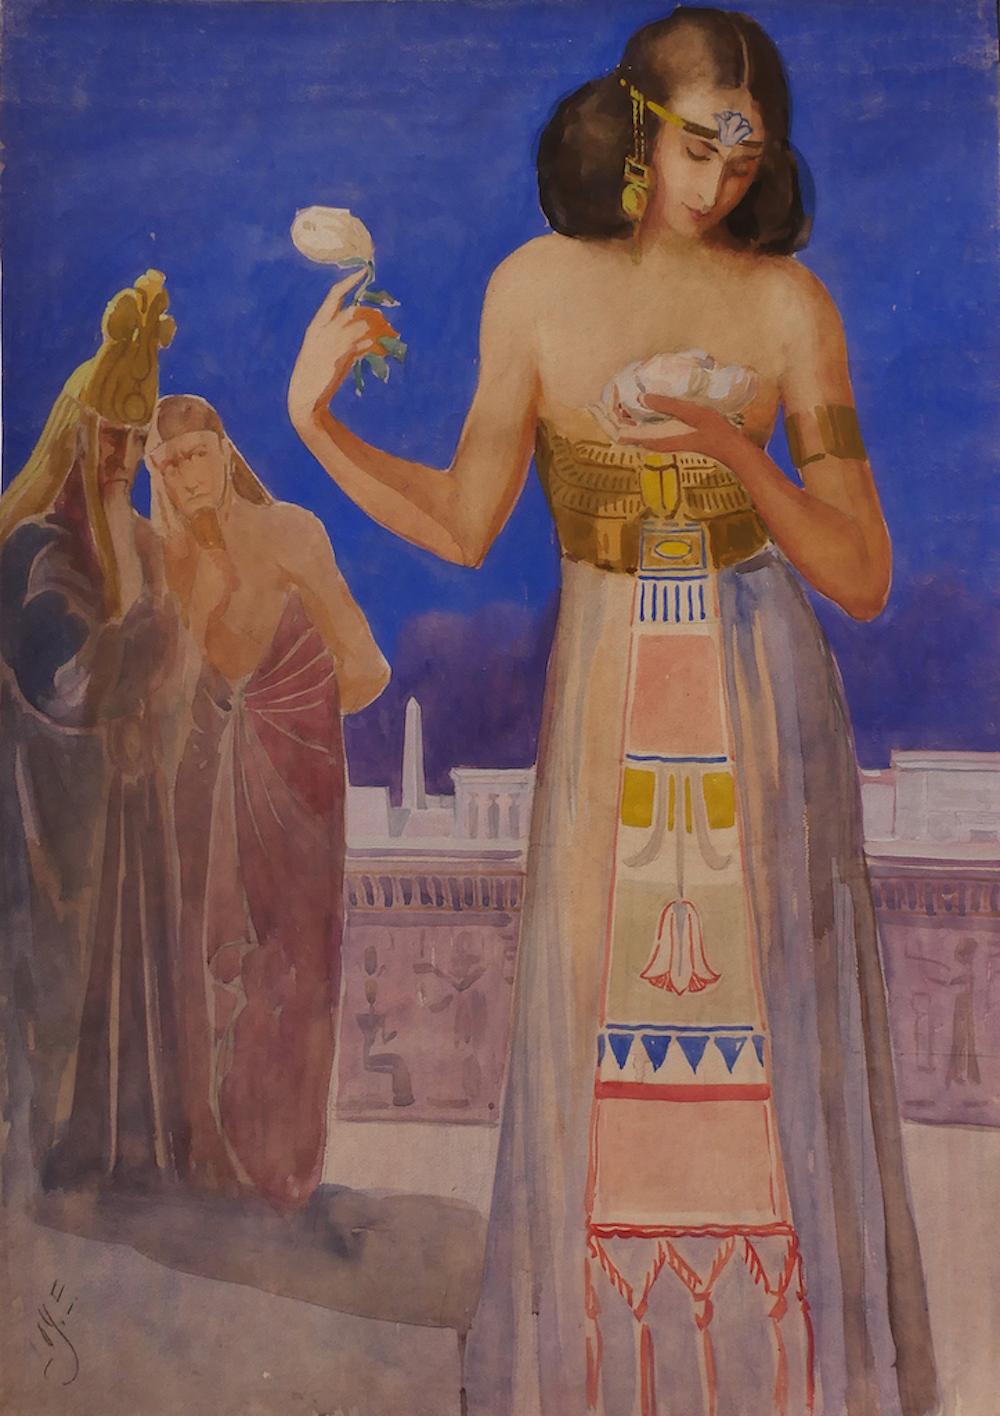 Erminio Loy Figurative Art - Ancient Egypt - Original Watercolor by E. Loy - Early 20th Century 